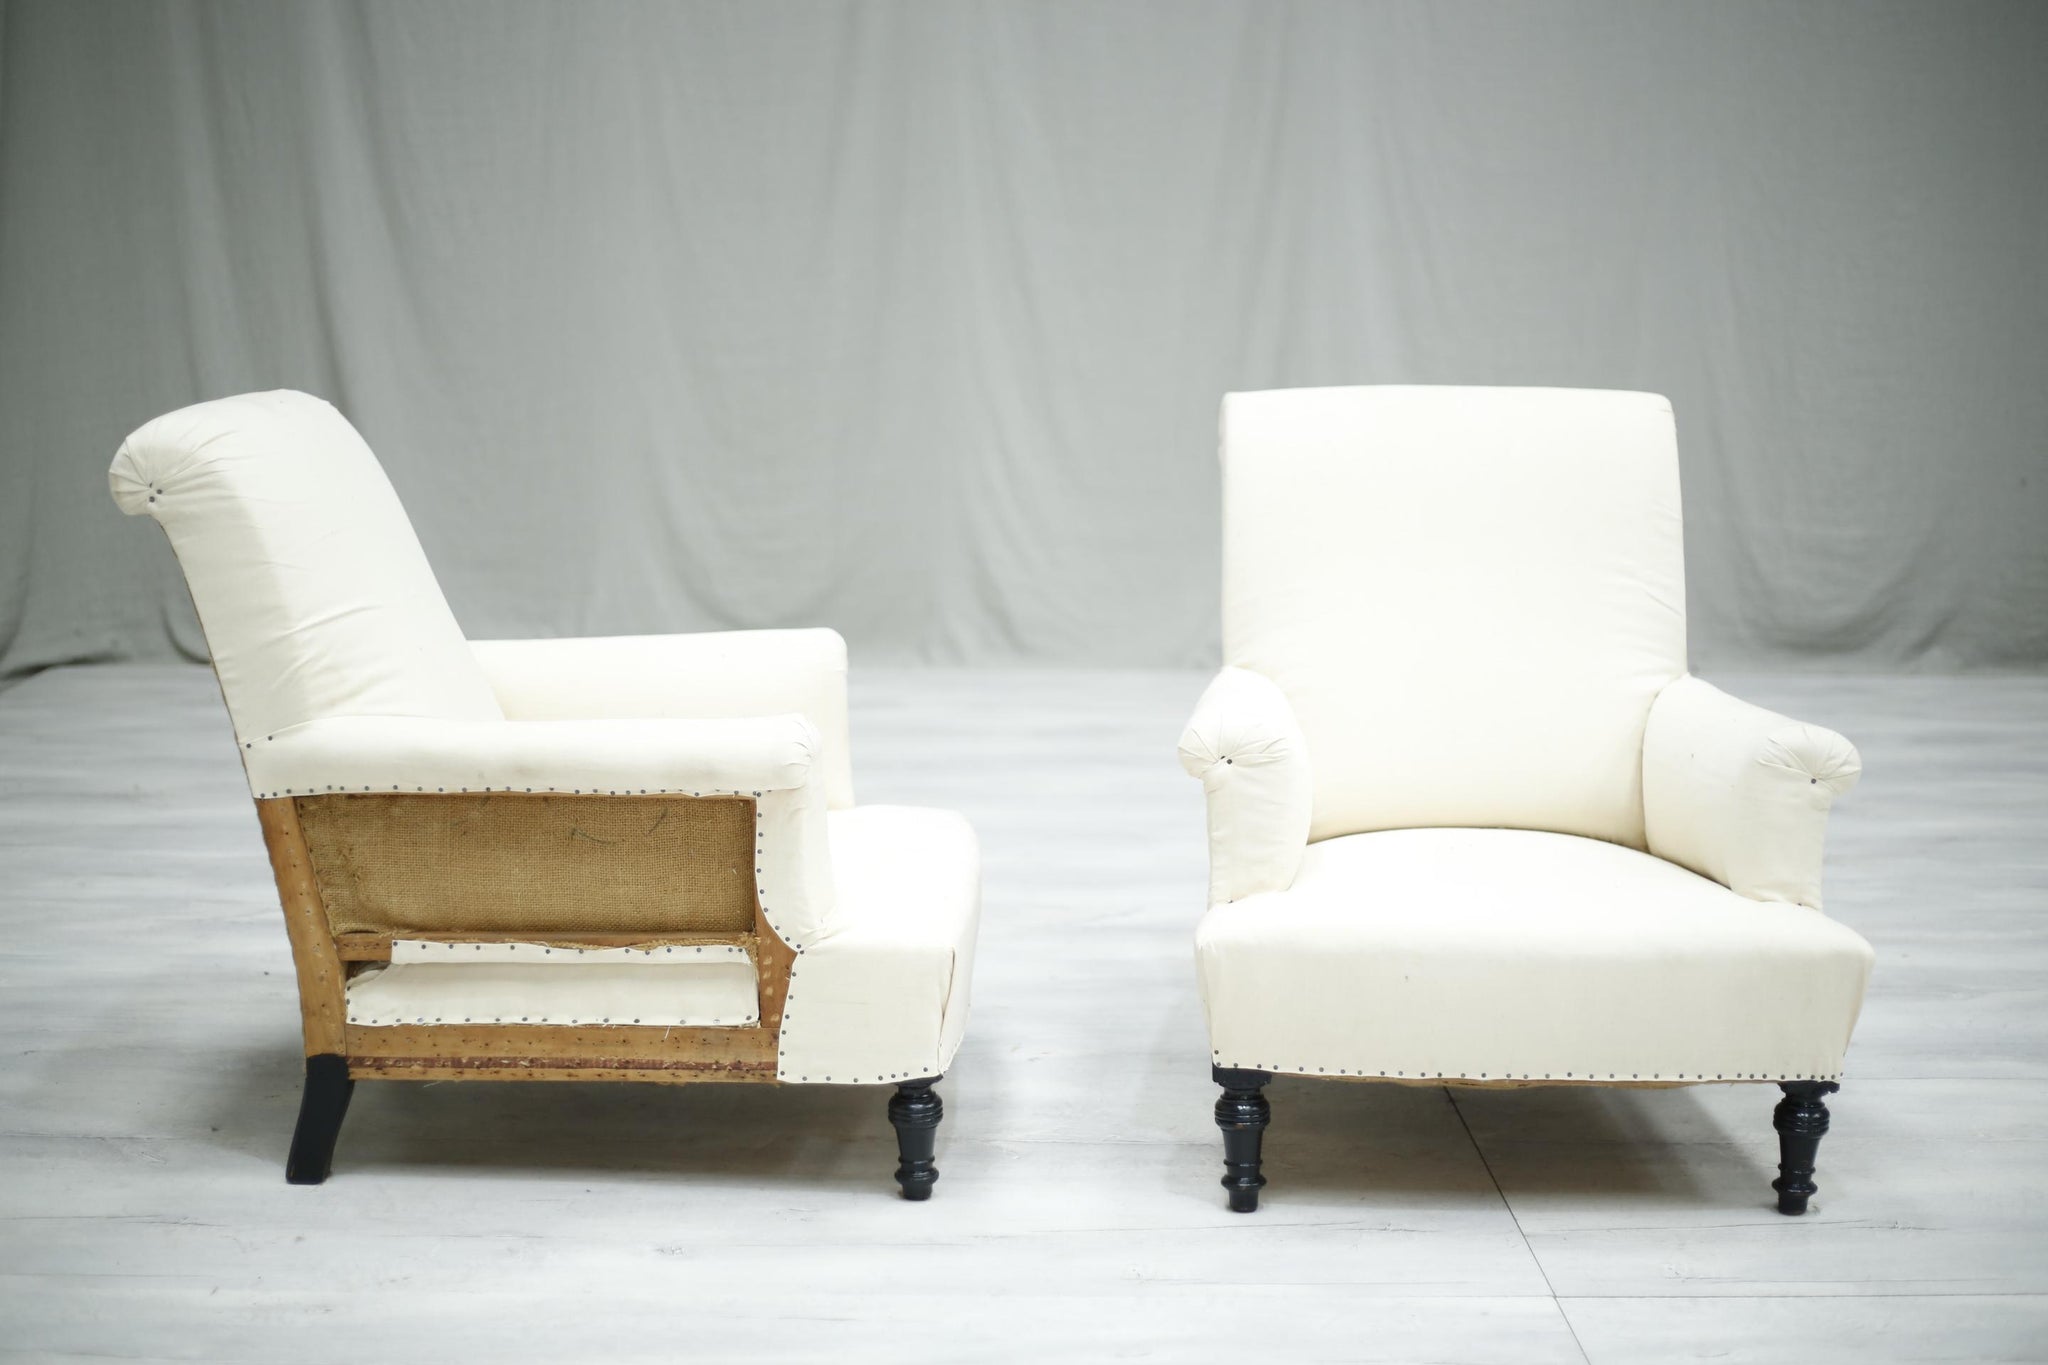 Pair of Antique French deep seated scroll back armchairs - TallBoy Interiors